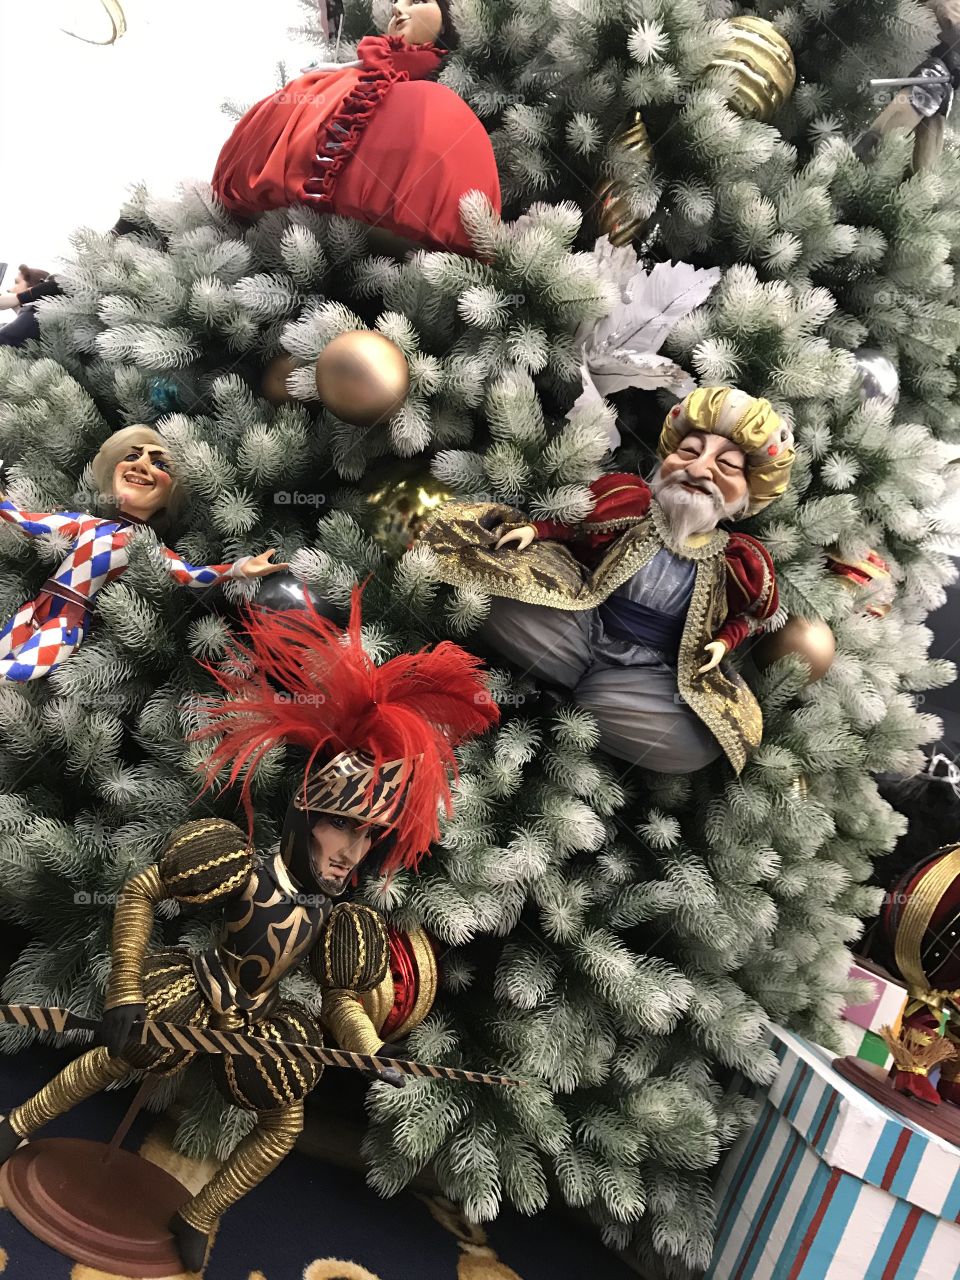 Dolls in Christmas trees. Christmas Eve.